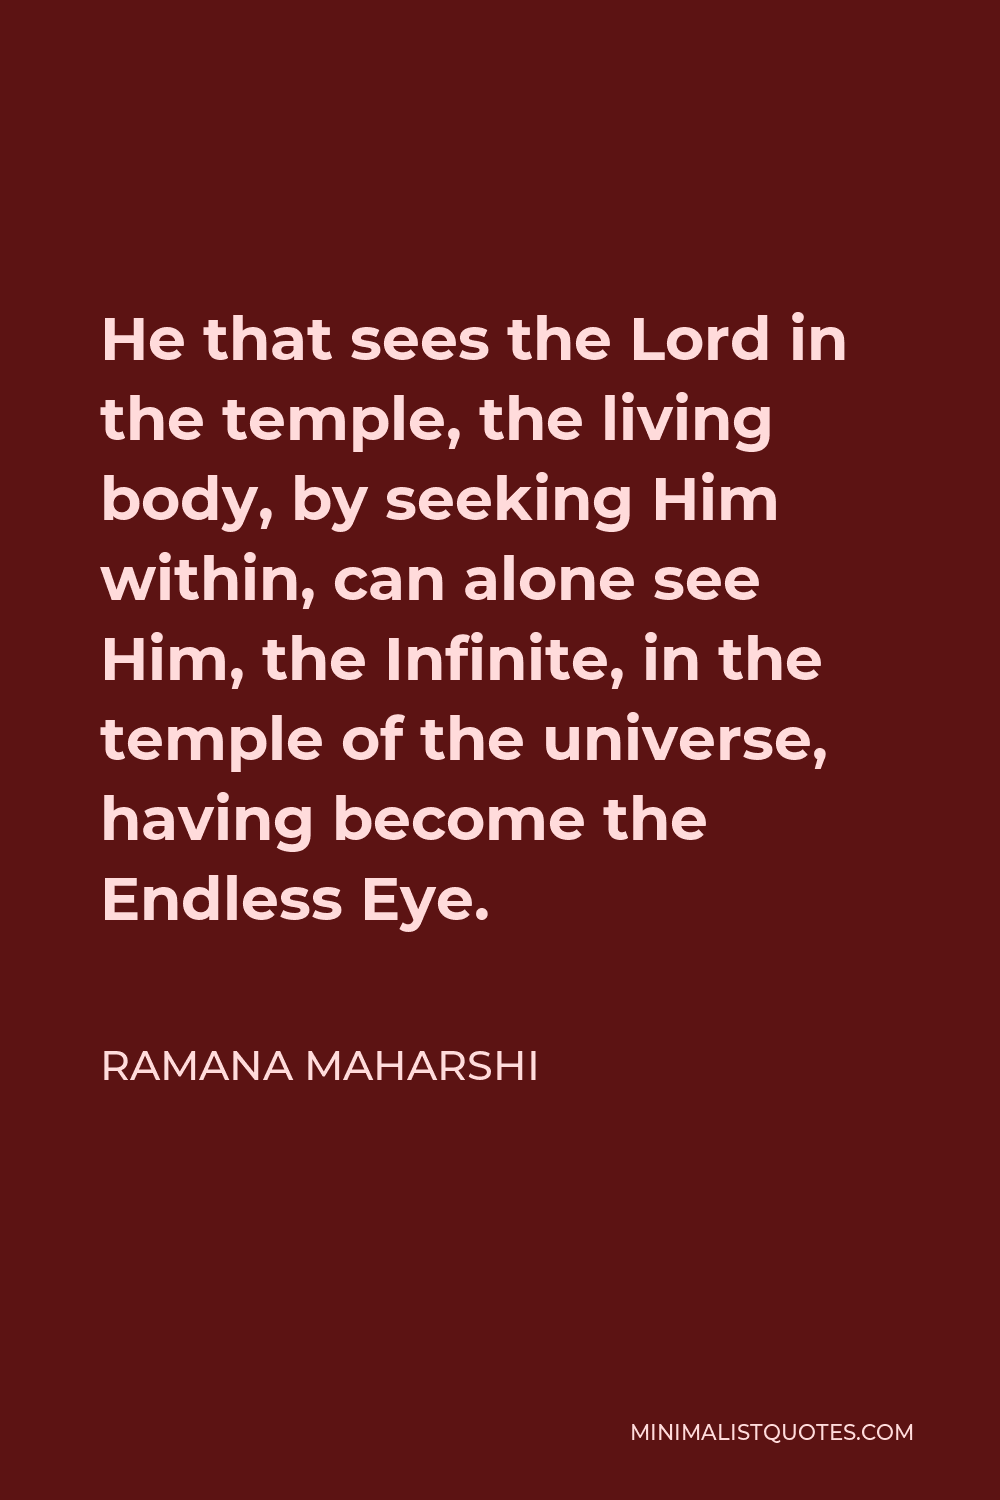 Ramana Maharshi Quote - He that sees the Lord in the temple, the living body, by seeking Him within, can alone see Him, the Infinite, in the temple of the universe, having become the Endless Eye.